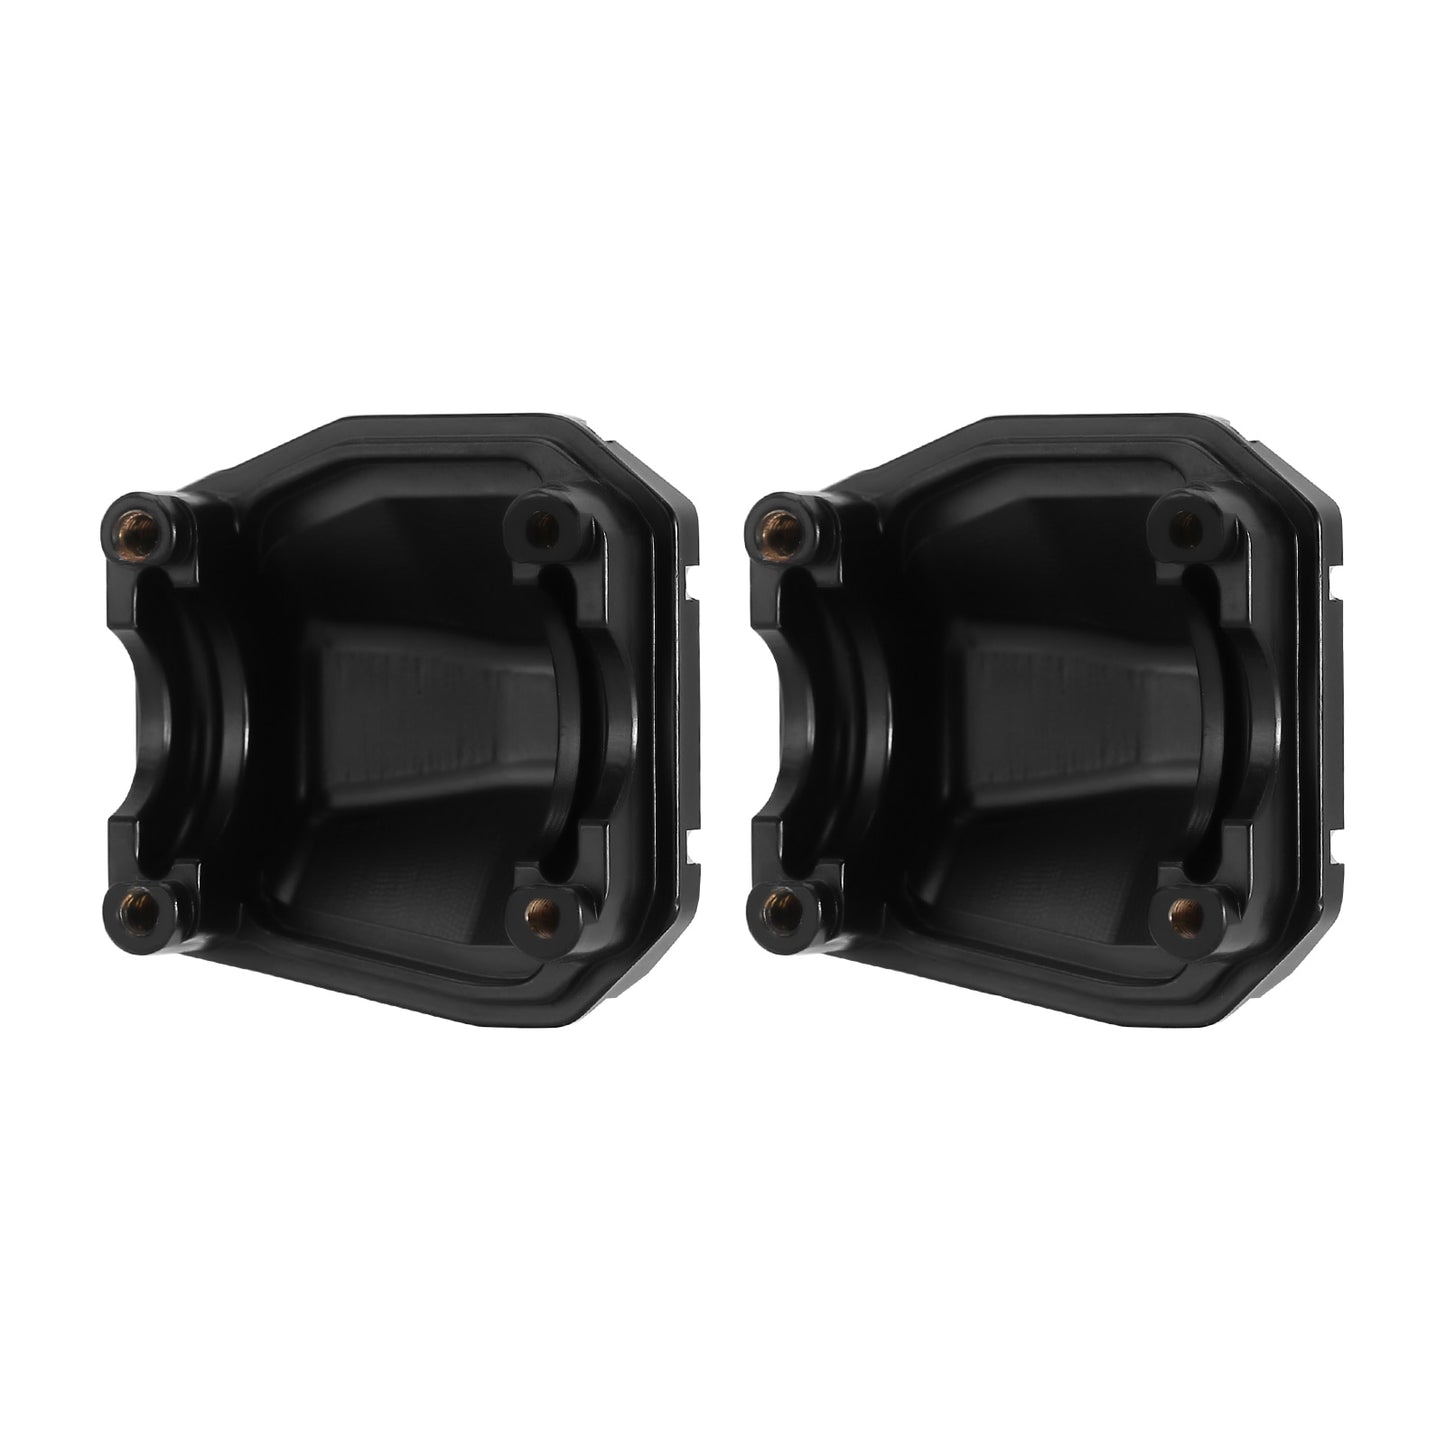 INJORA 38g Black Coating Brass Differential Axle Cover for 1/10 RC Crawler SCX10 PRO SCX10 III AR45 Upgrade